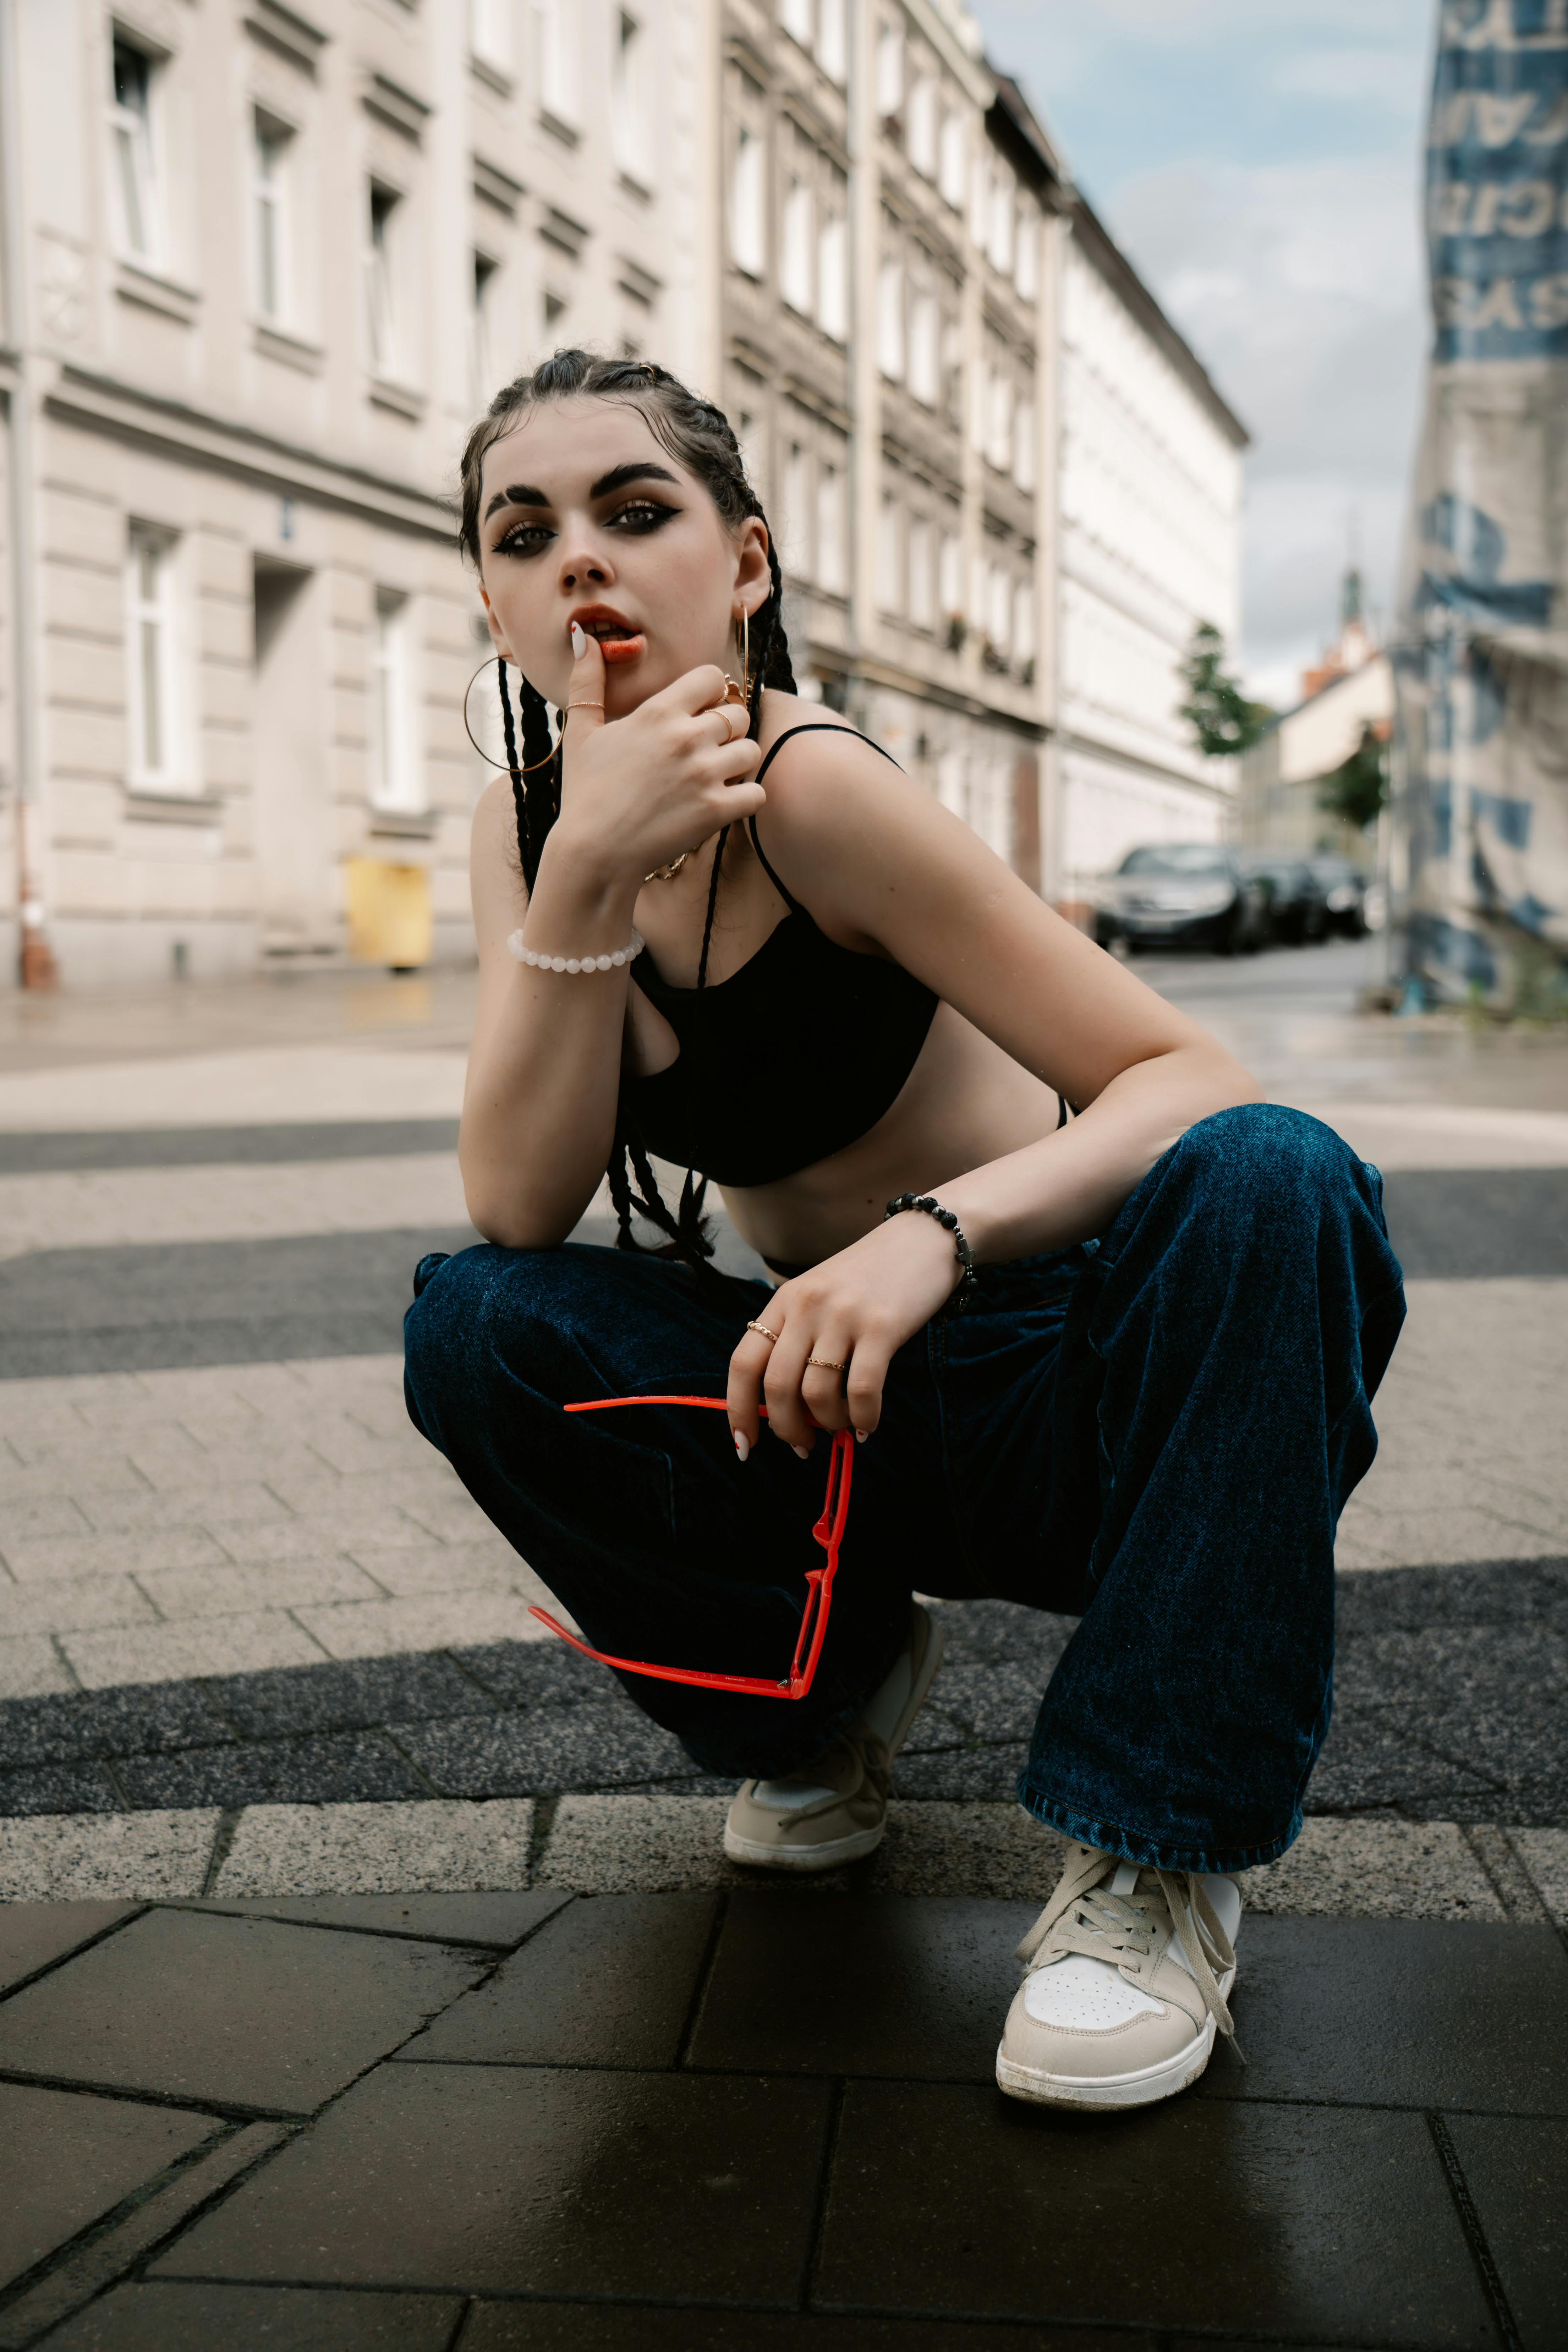 Photographer seeking passionate female models to collaborate with for street  fashion and portrait shoots in Montreal, Canada!